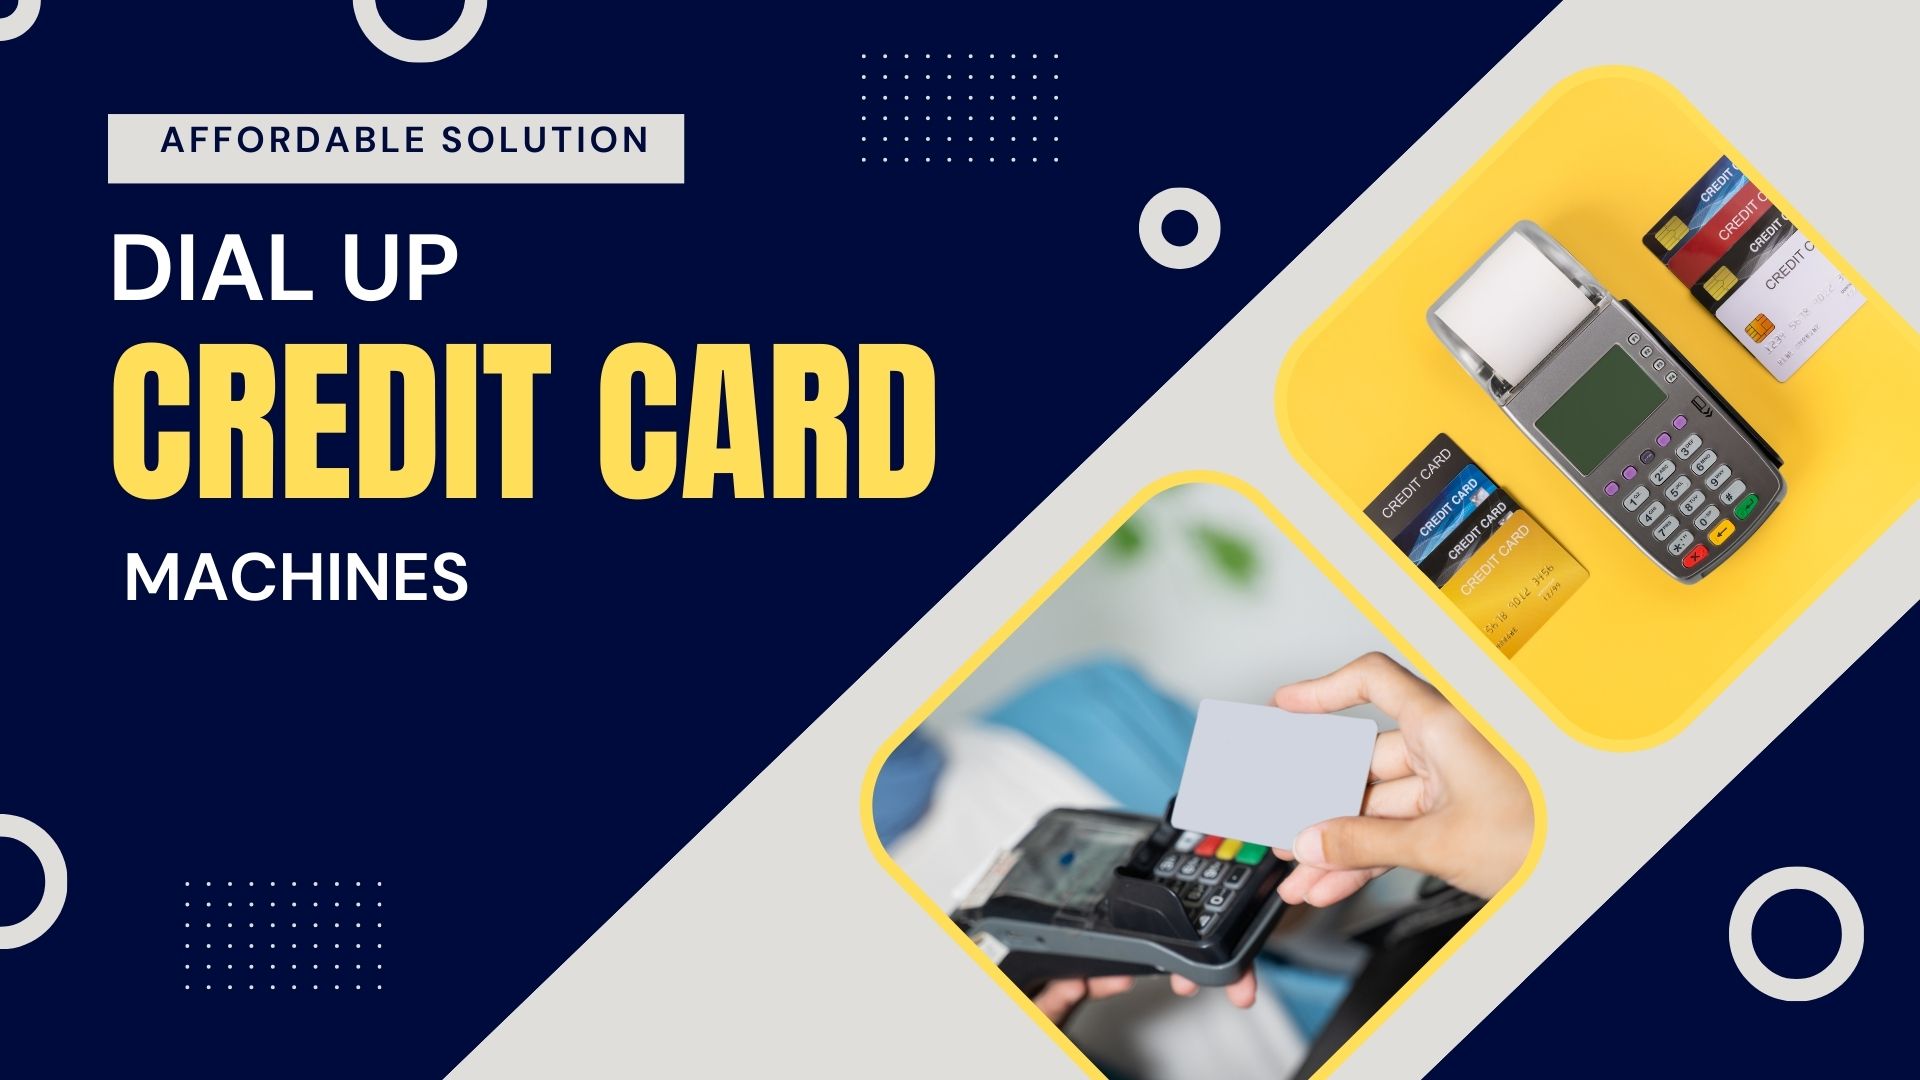 Dial Up Credit Card Machines